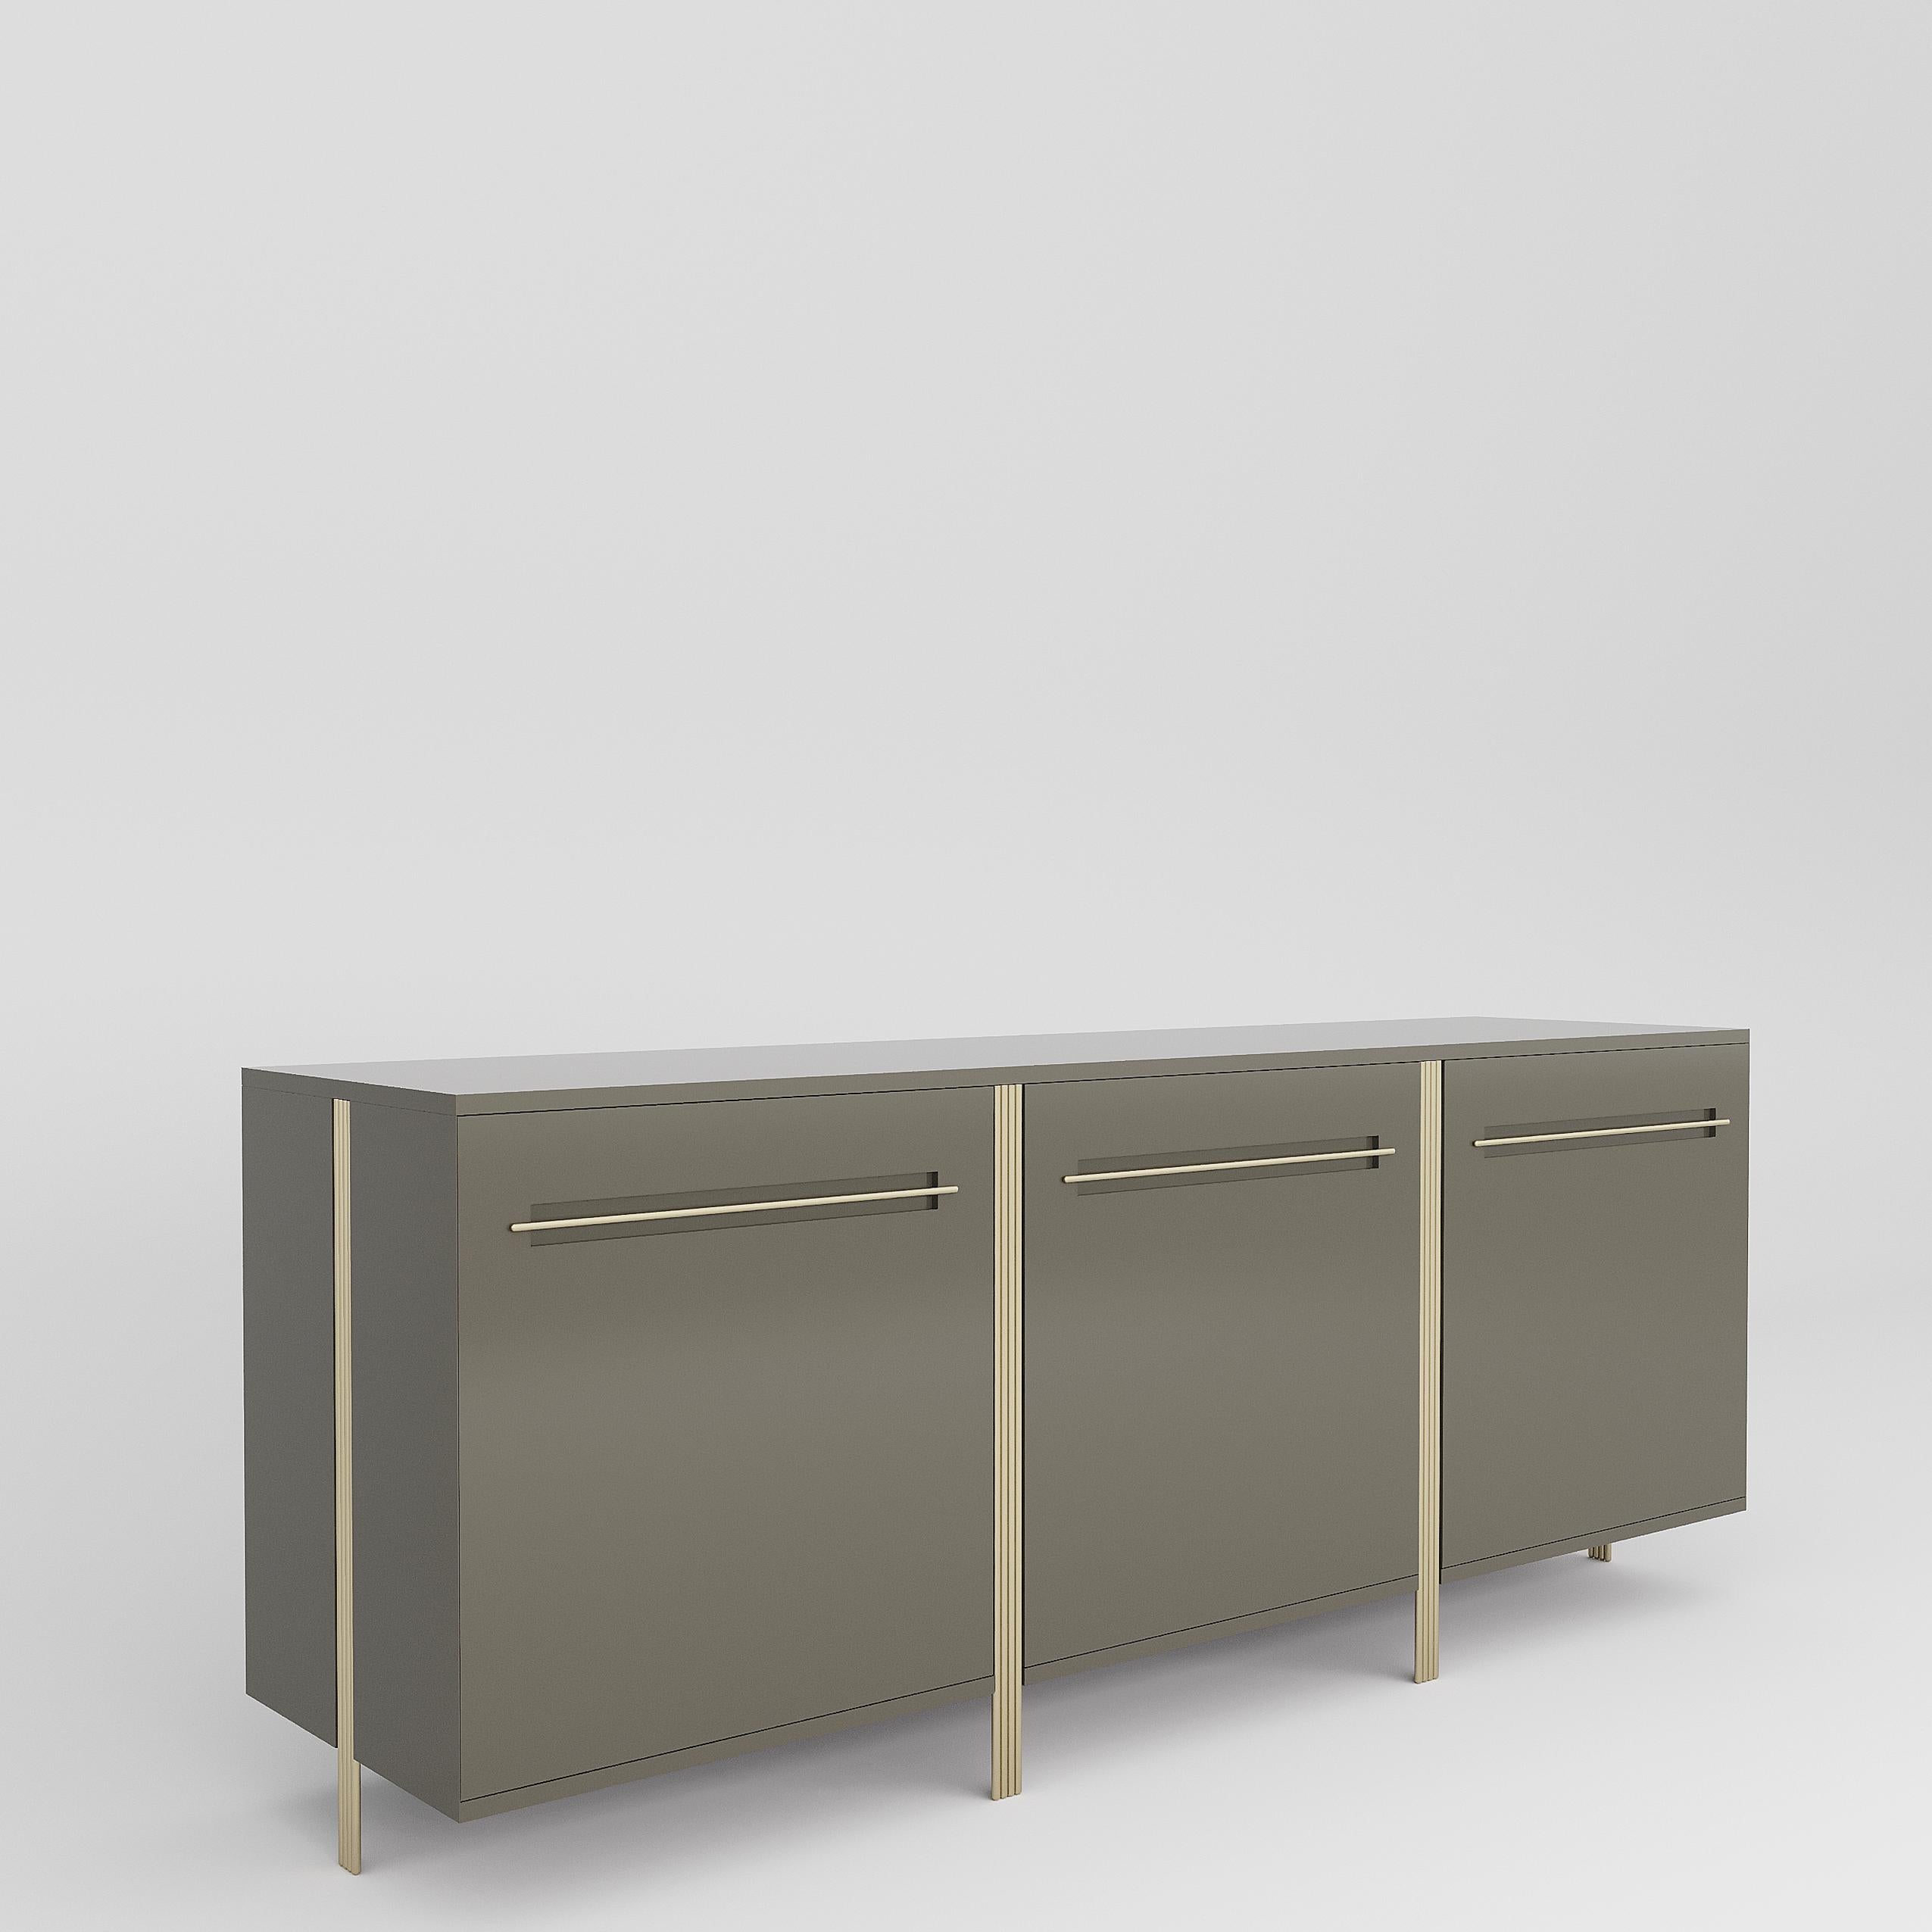 Lacquered VERSAGA sideboard in custom colors with Antique Brass handles and feet For Sale